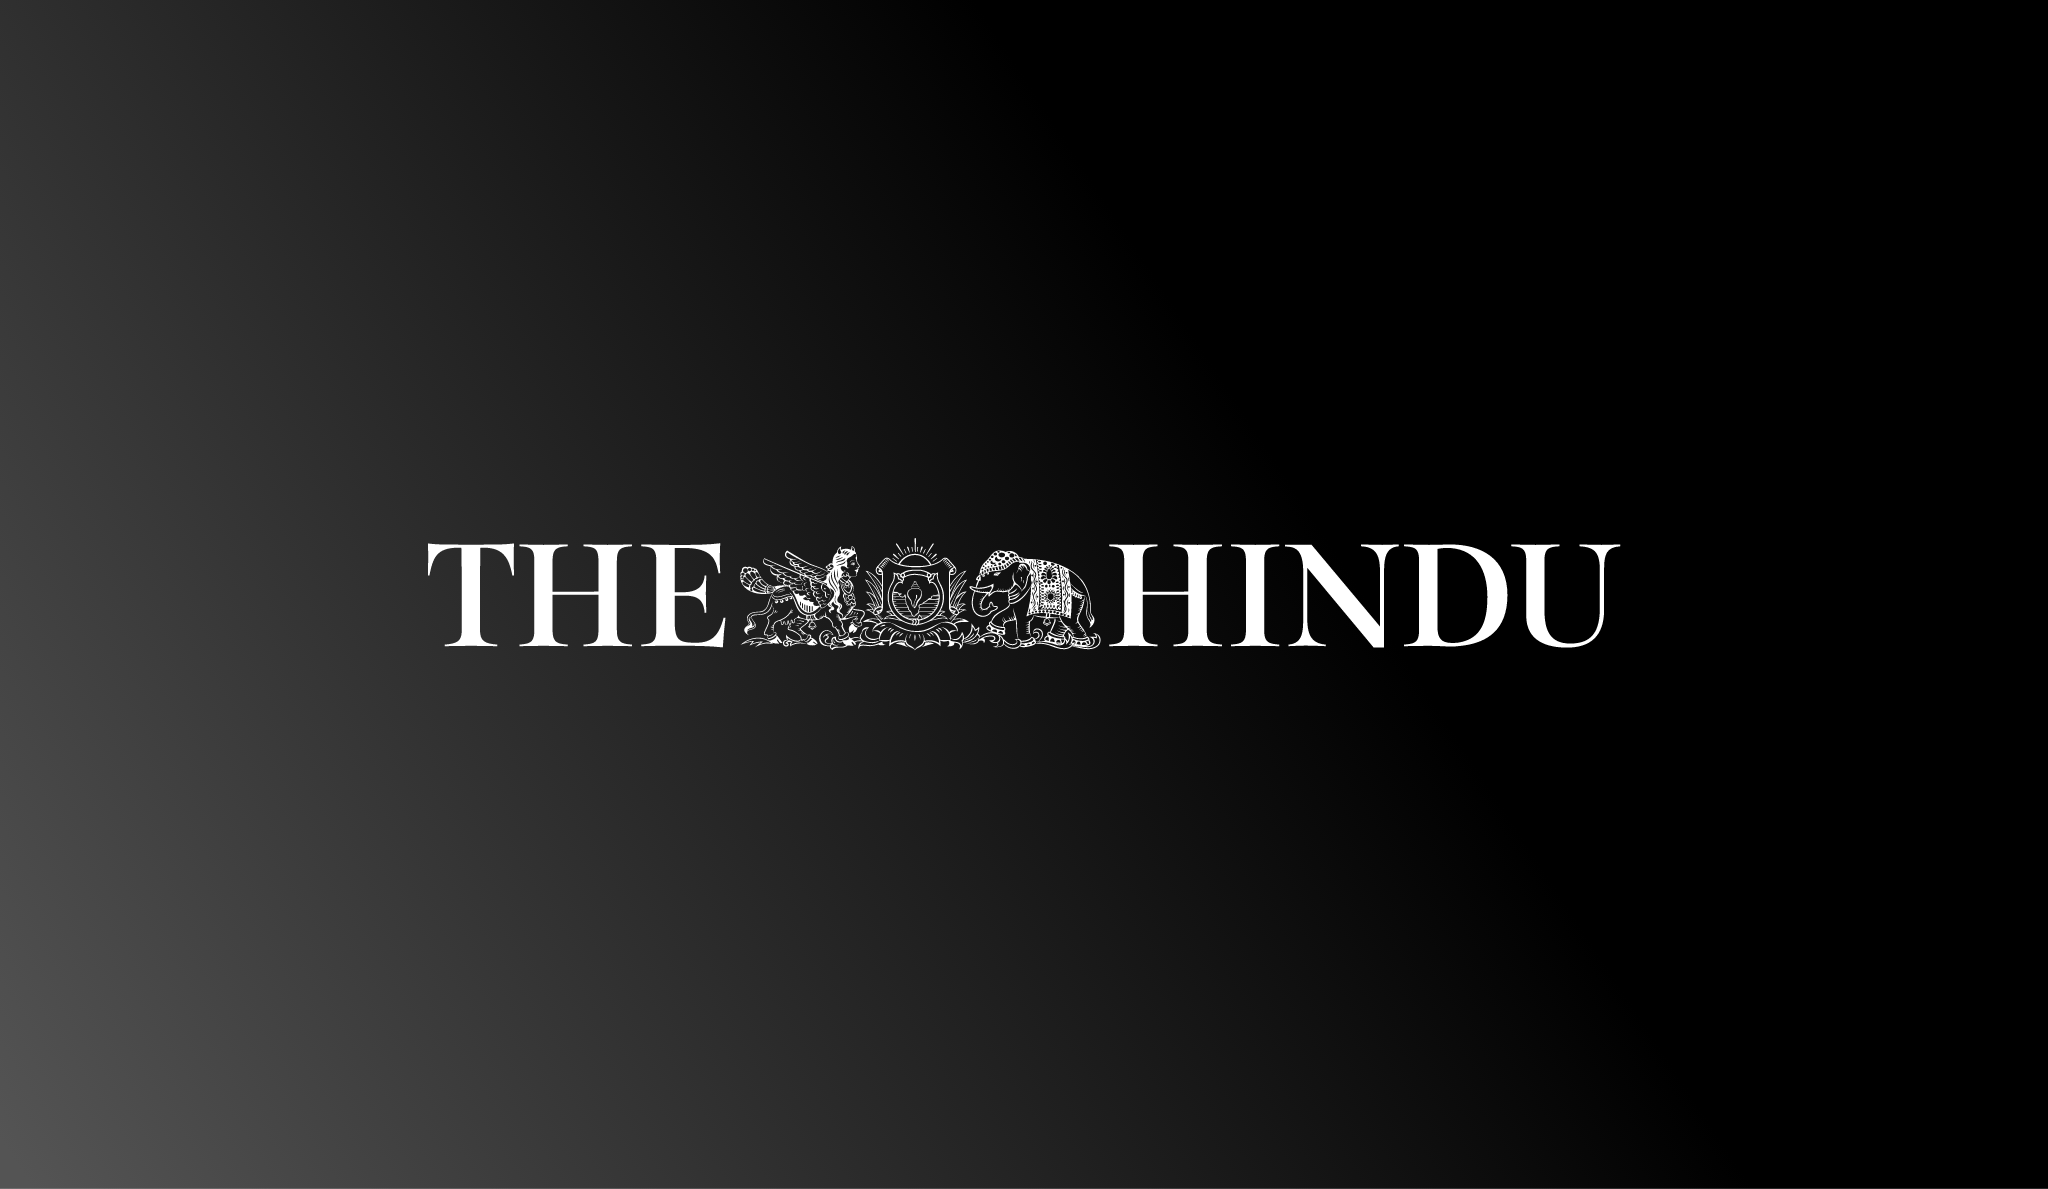 News: Today’s News update from The Hindu | The Hindu